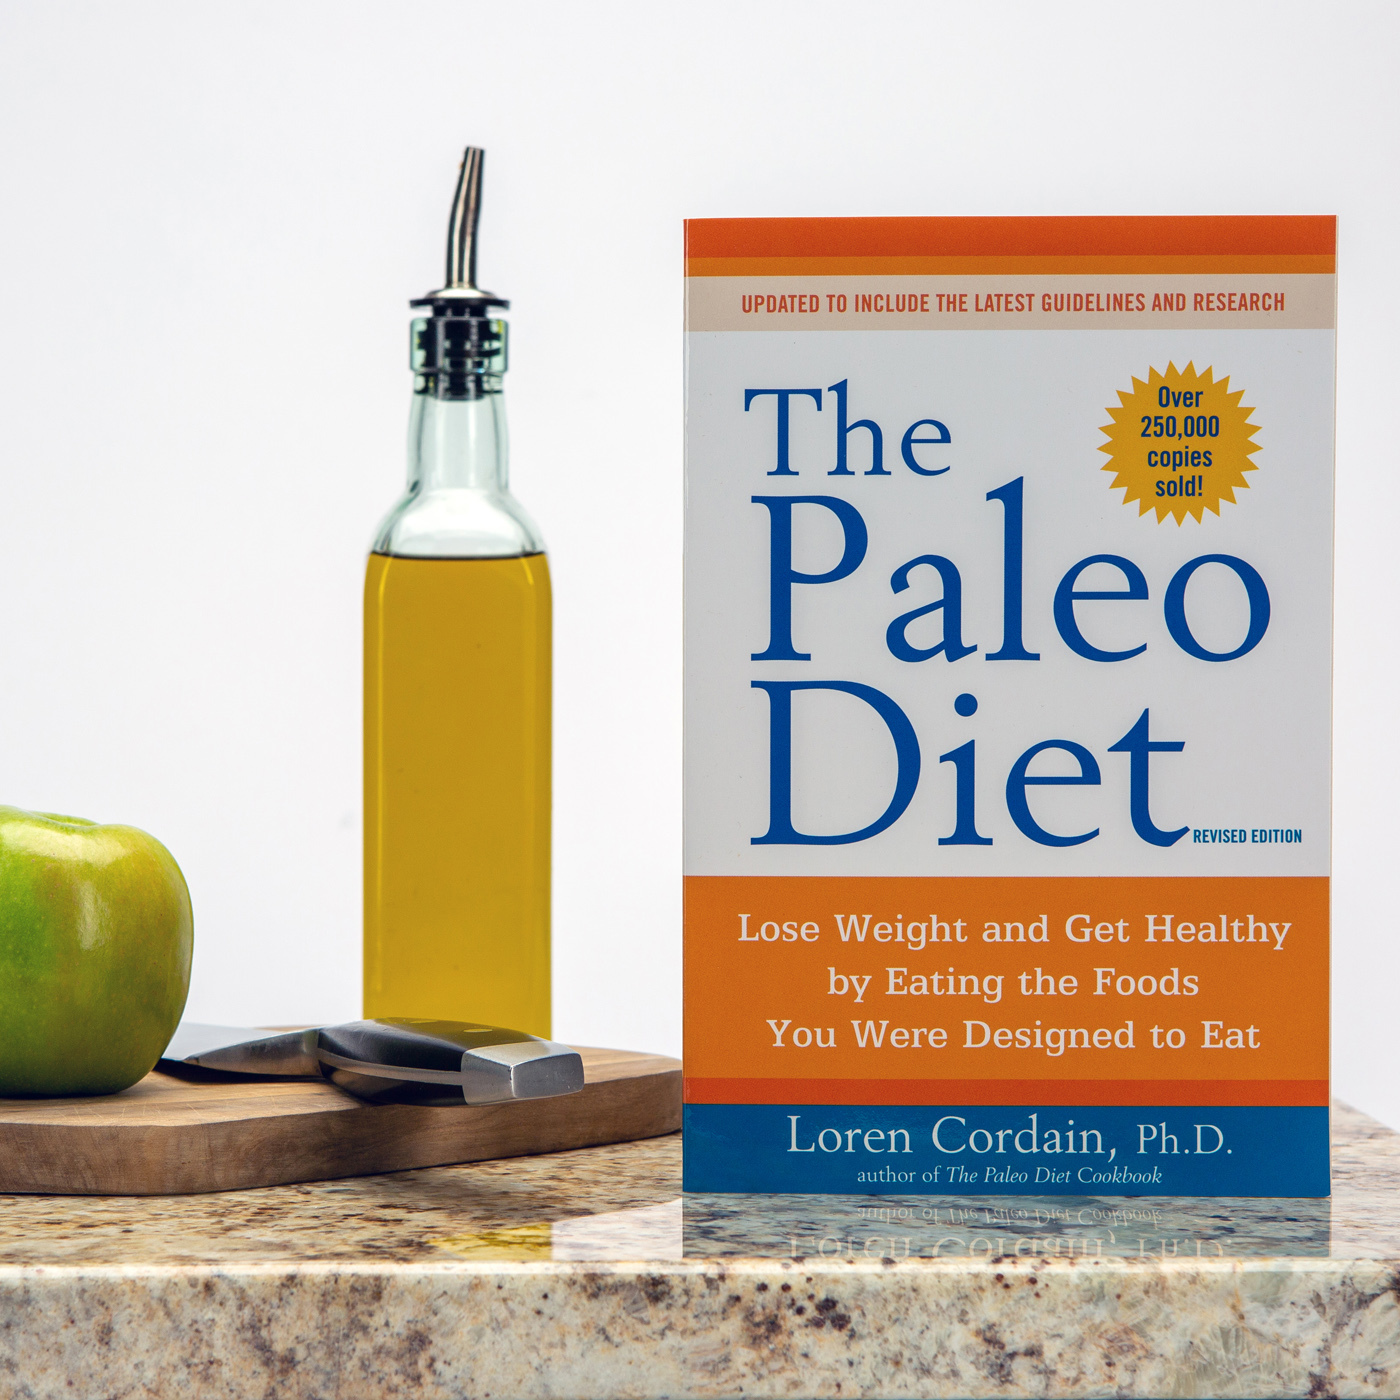 A picture of The Paleo Diet book